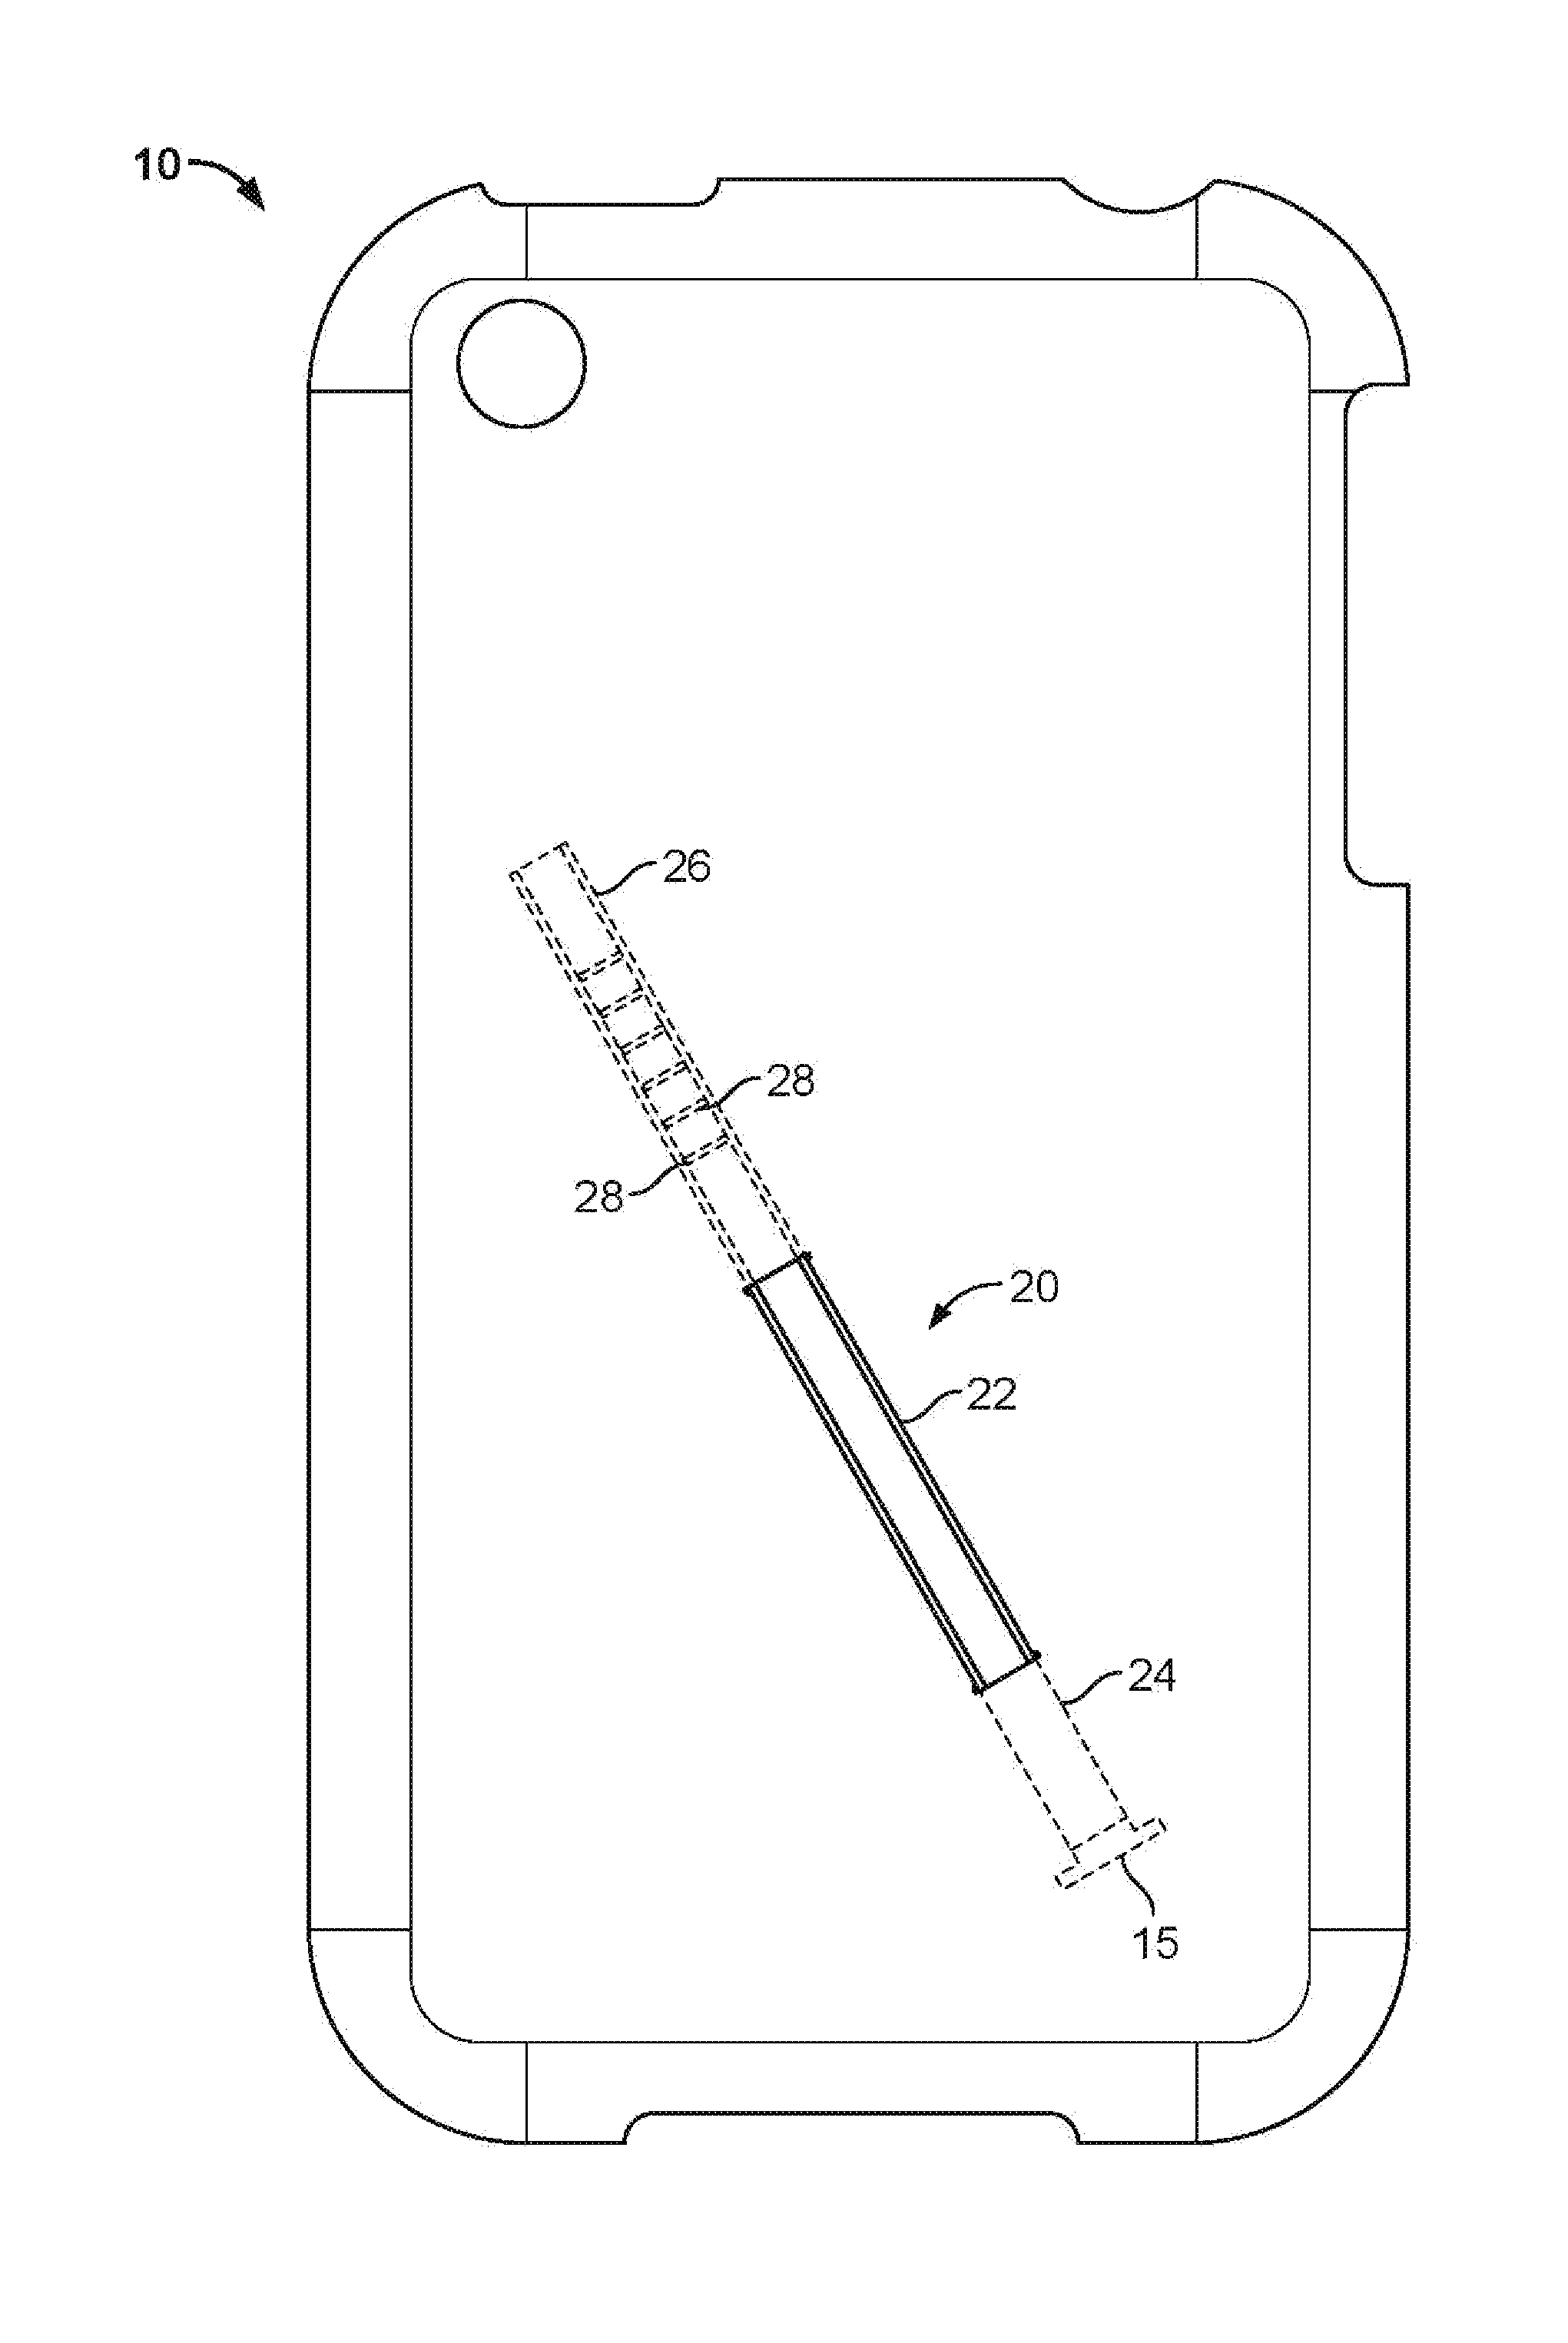 Holding case for portable electronic devices